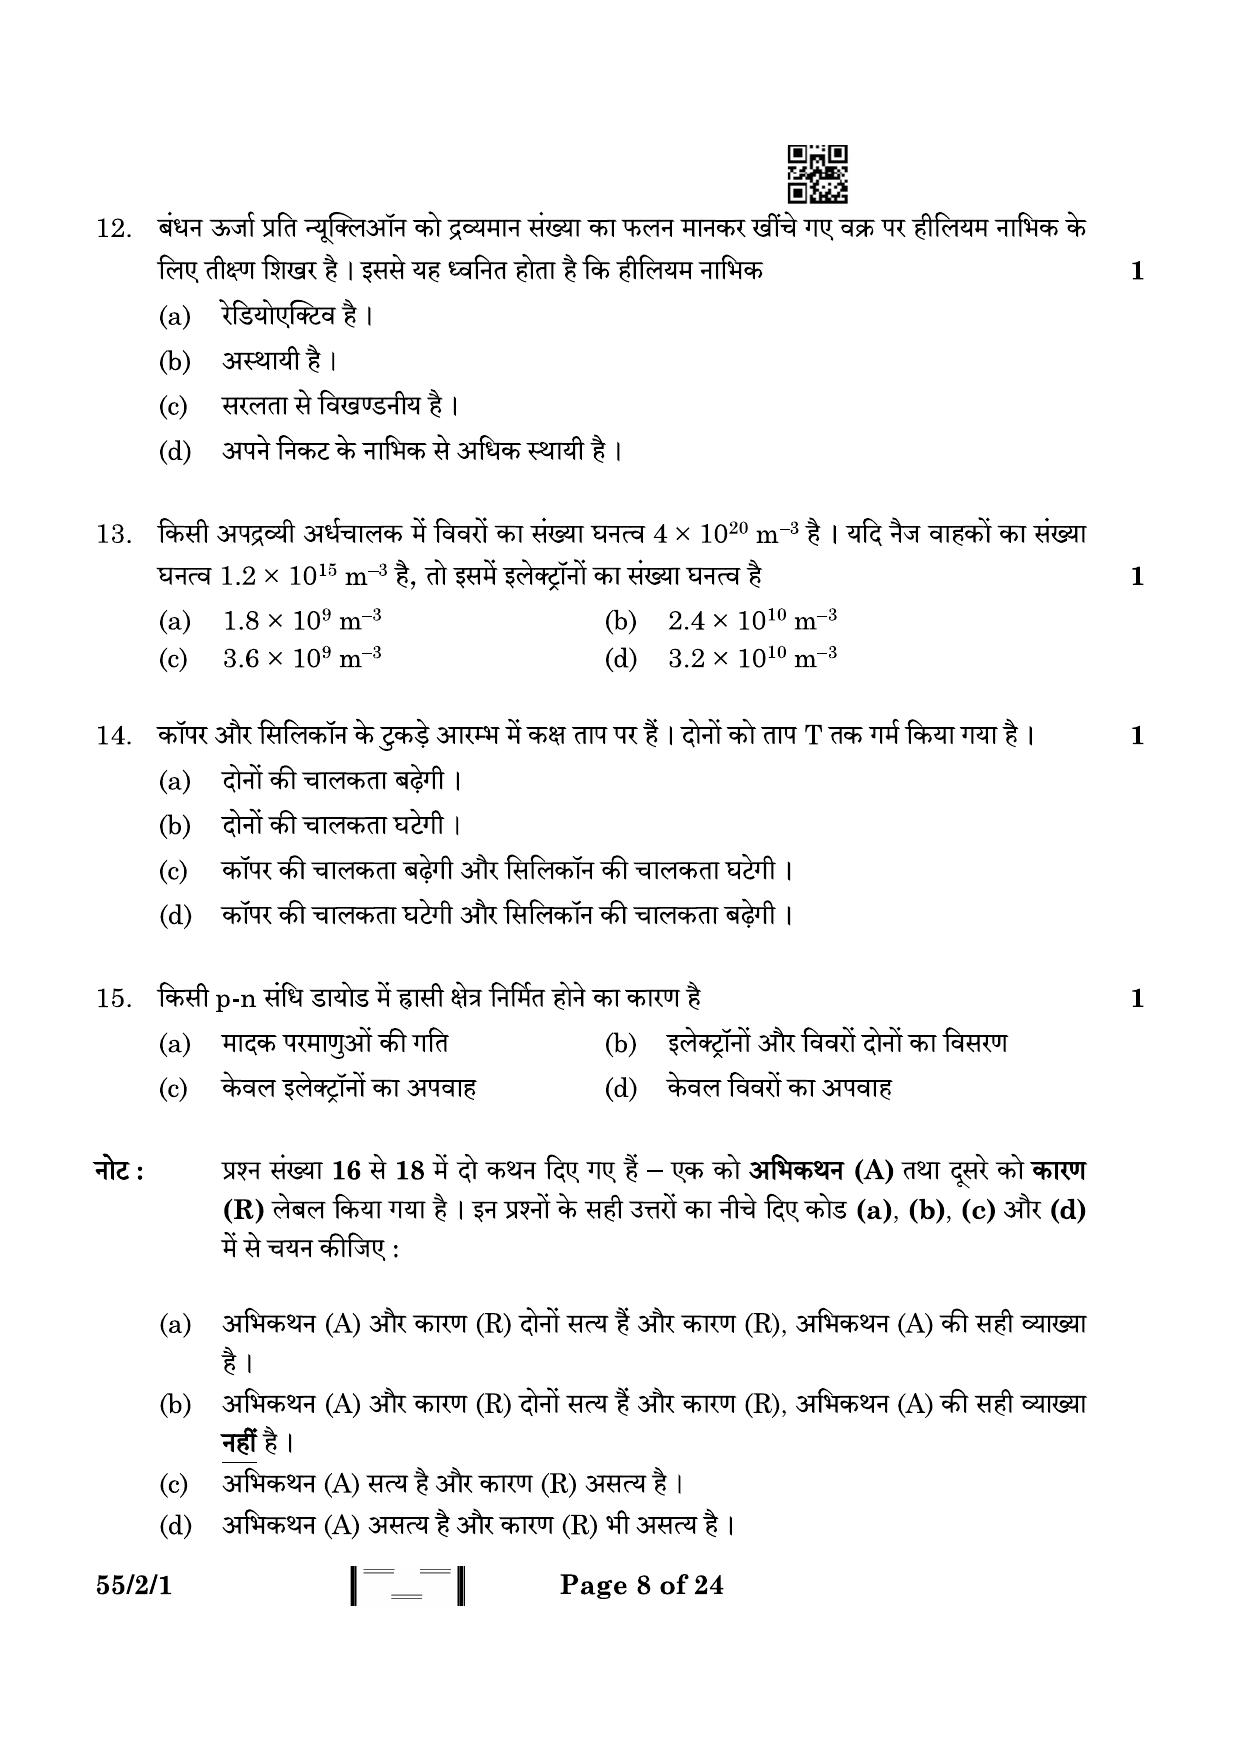 CBSE Class 12 55-2-1 Physics 2023 Question Paper - Page 8